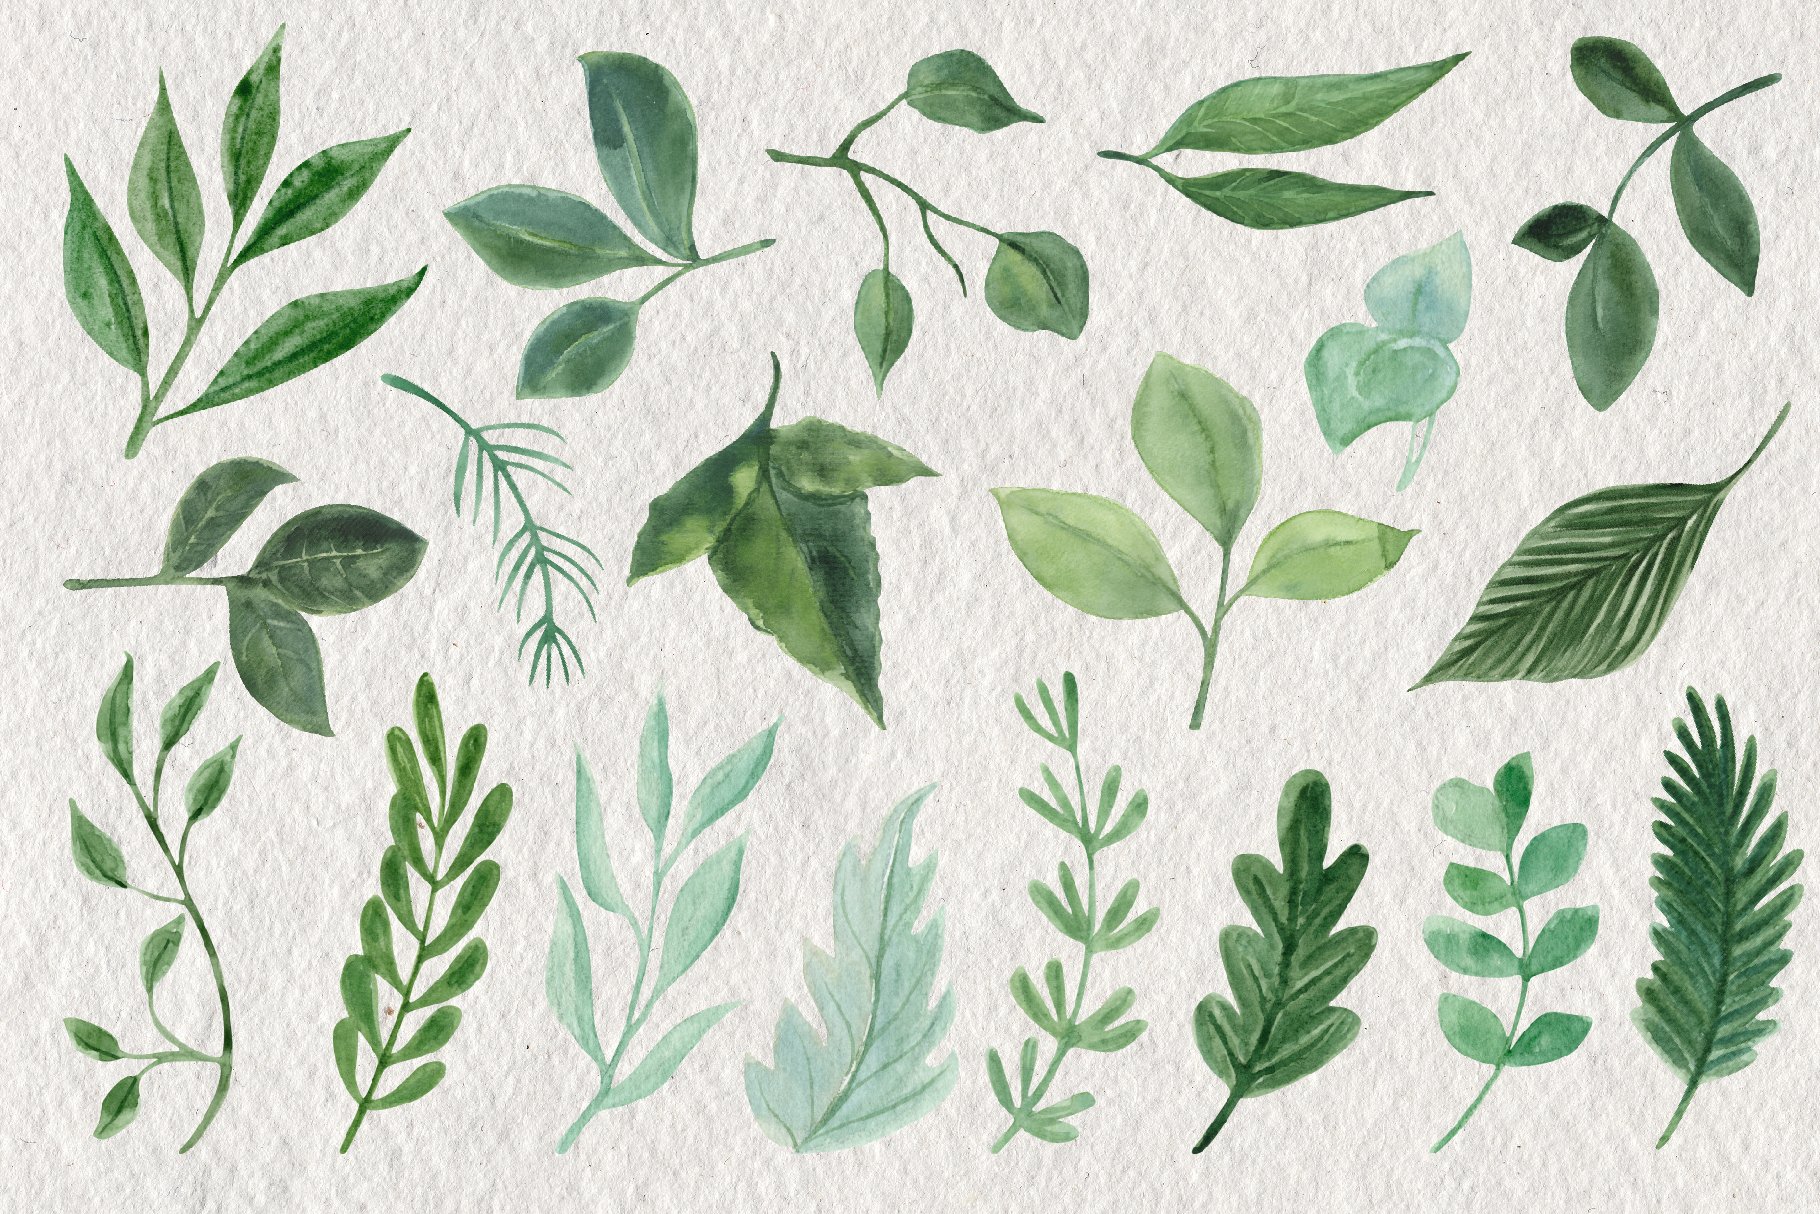 Bunch of green leaves on a white paper.